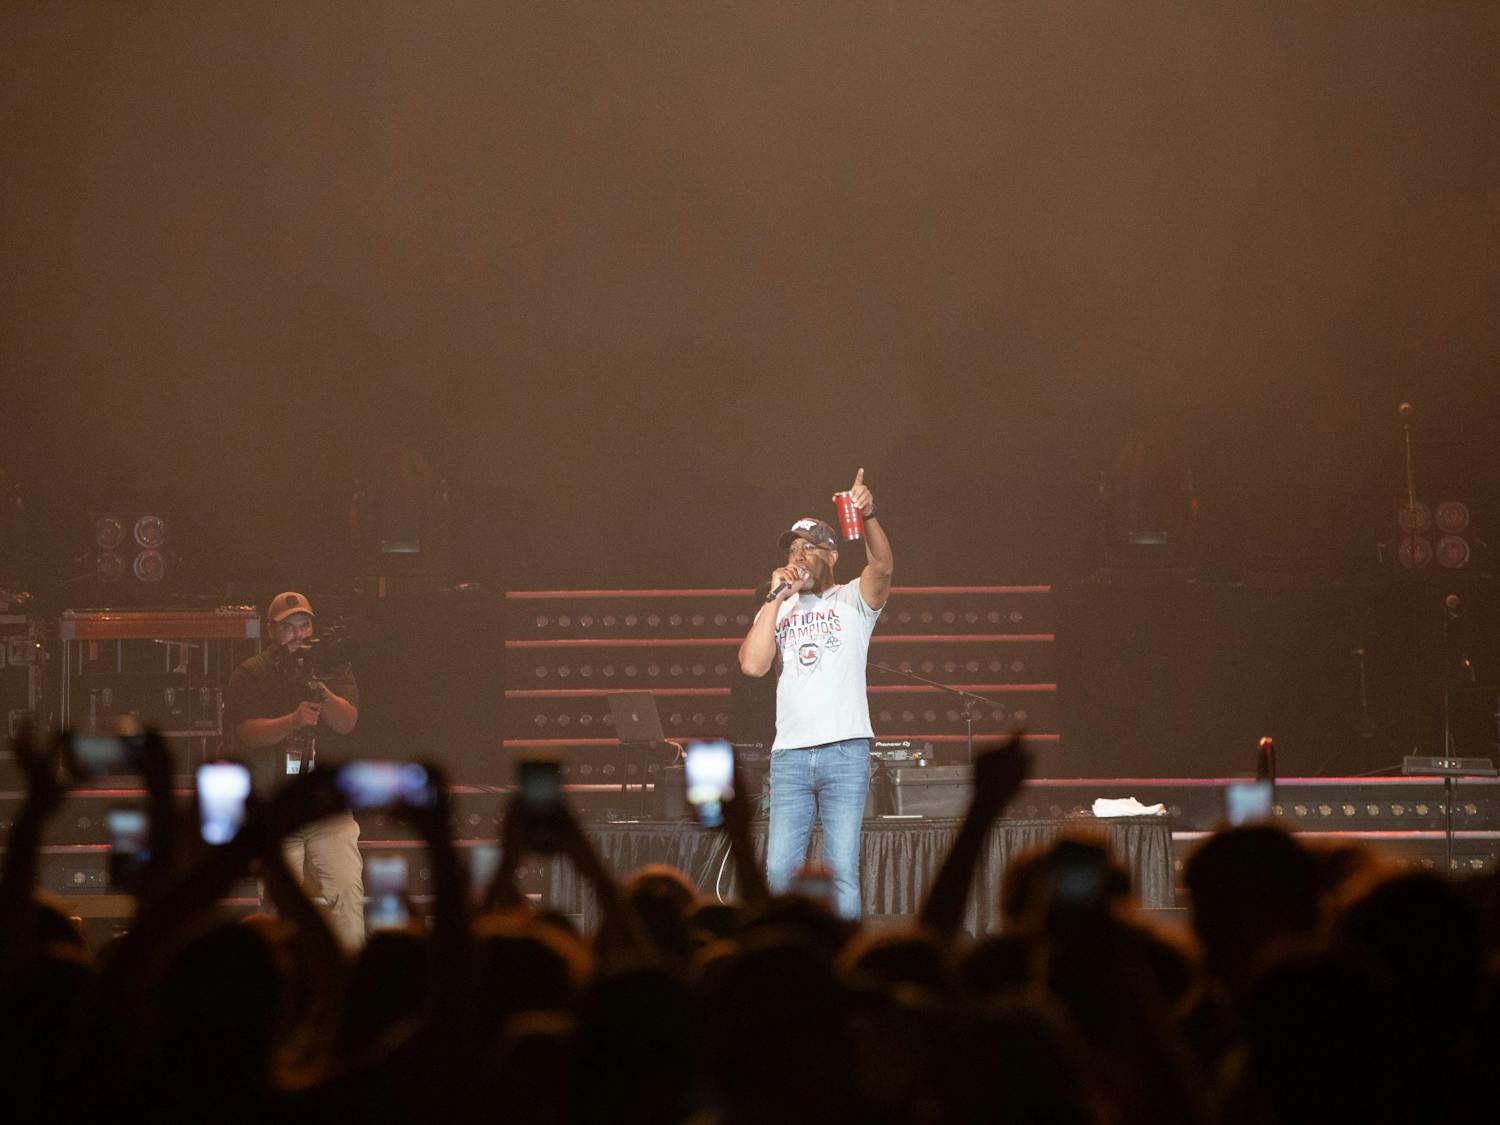 Darius Rucker greets the crowd of students prior to a concert at Colonial Life Arena on Sunday, April 24, 2022. The concert was held as a celebration for the women's basketball team.